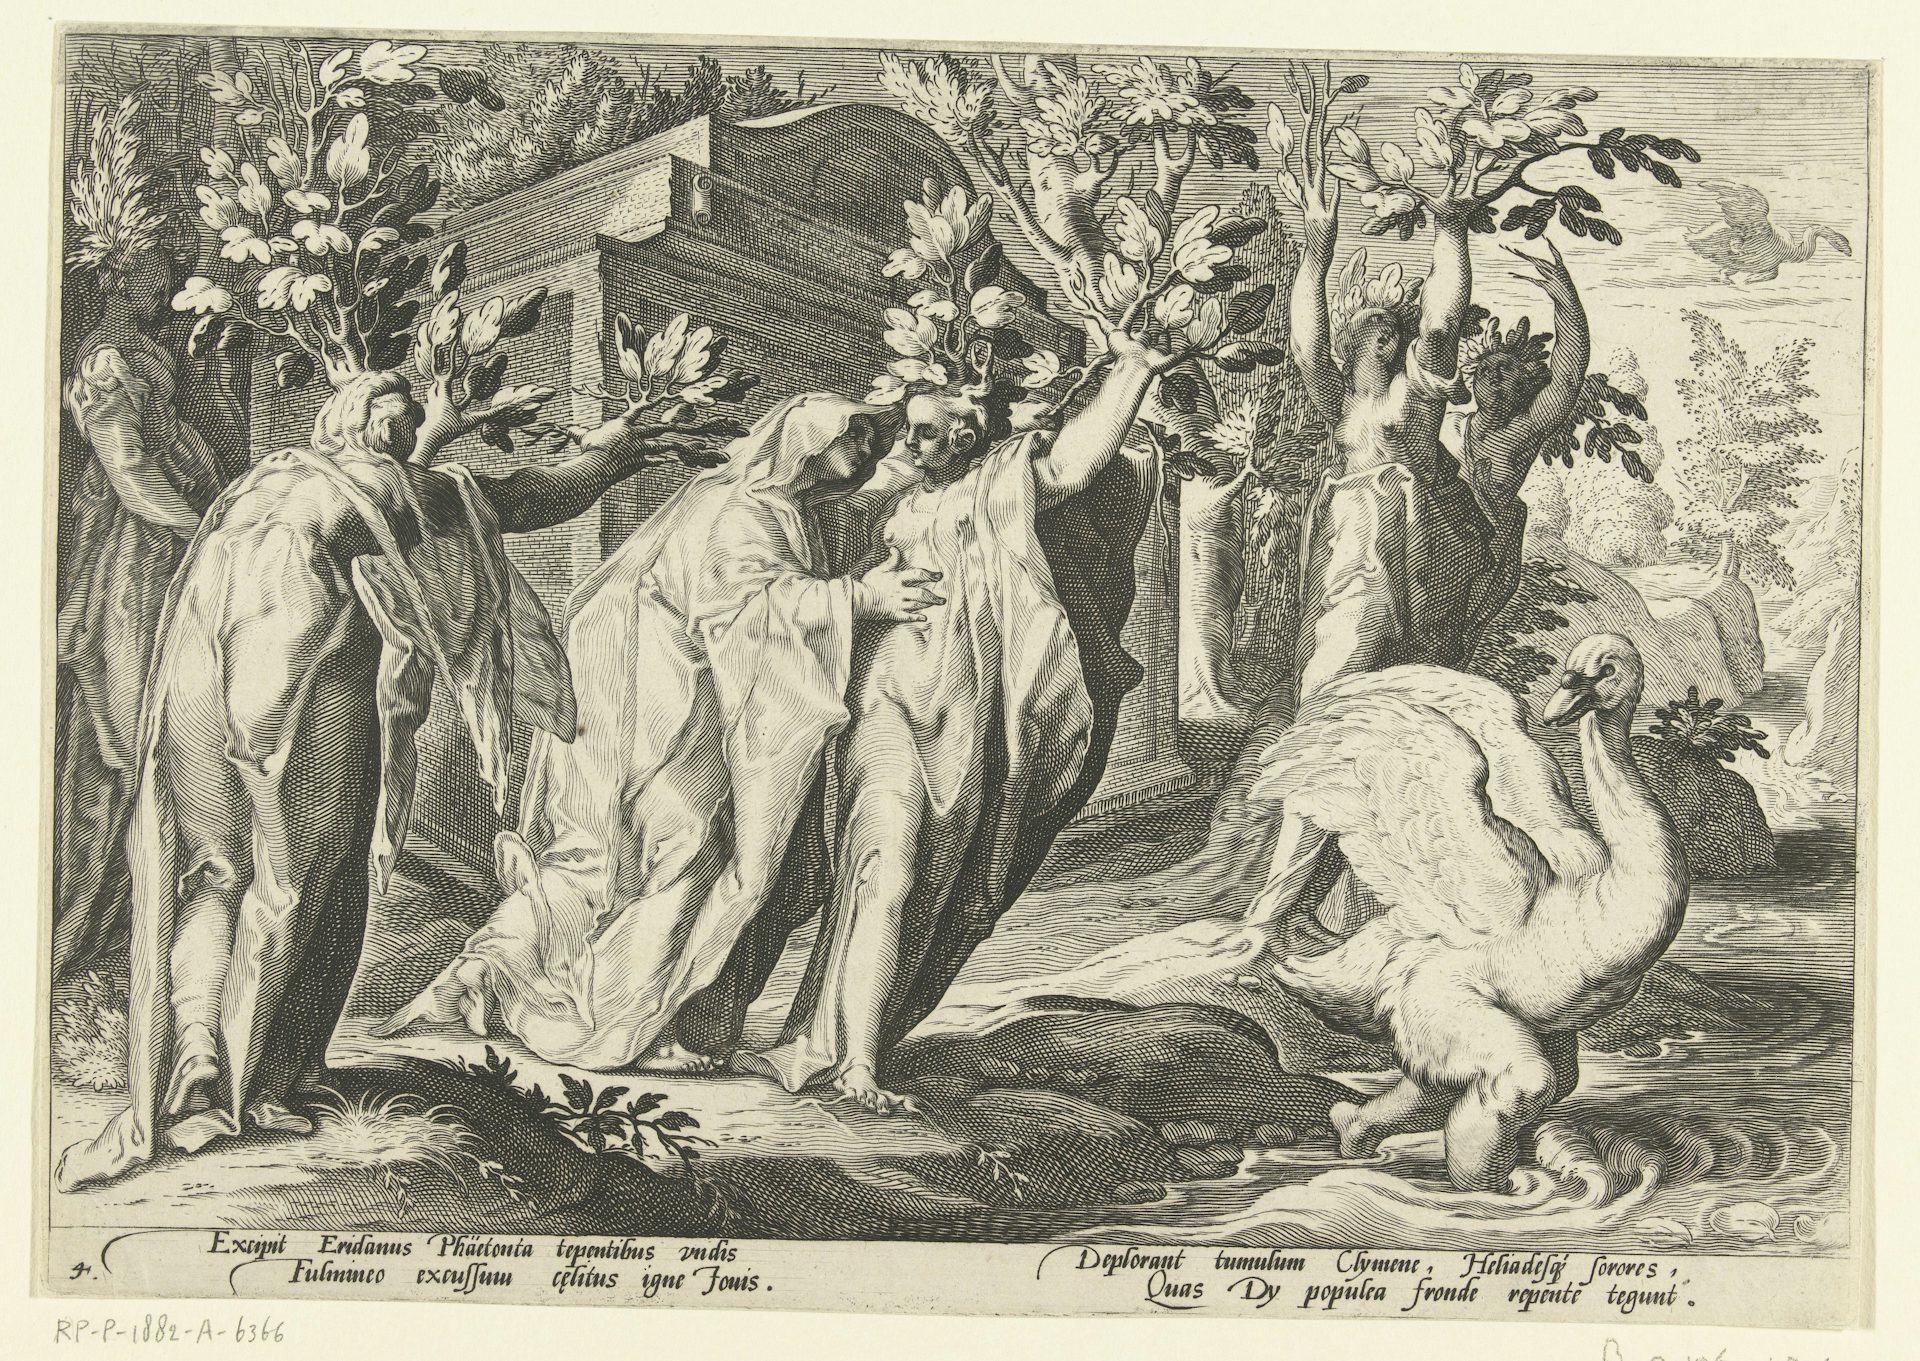 Print of the transformation of the Heliades and of Cycnus by Hendrick Goltzius